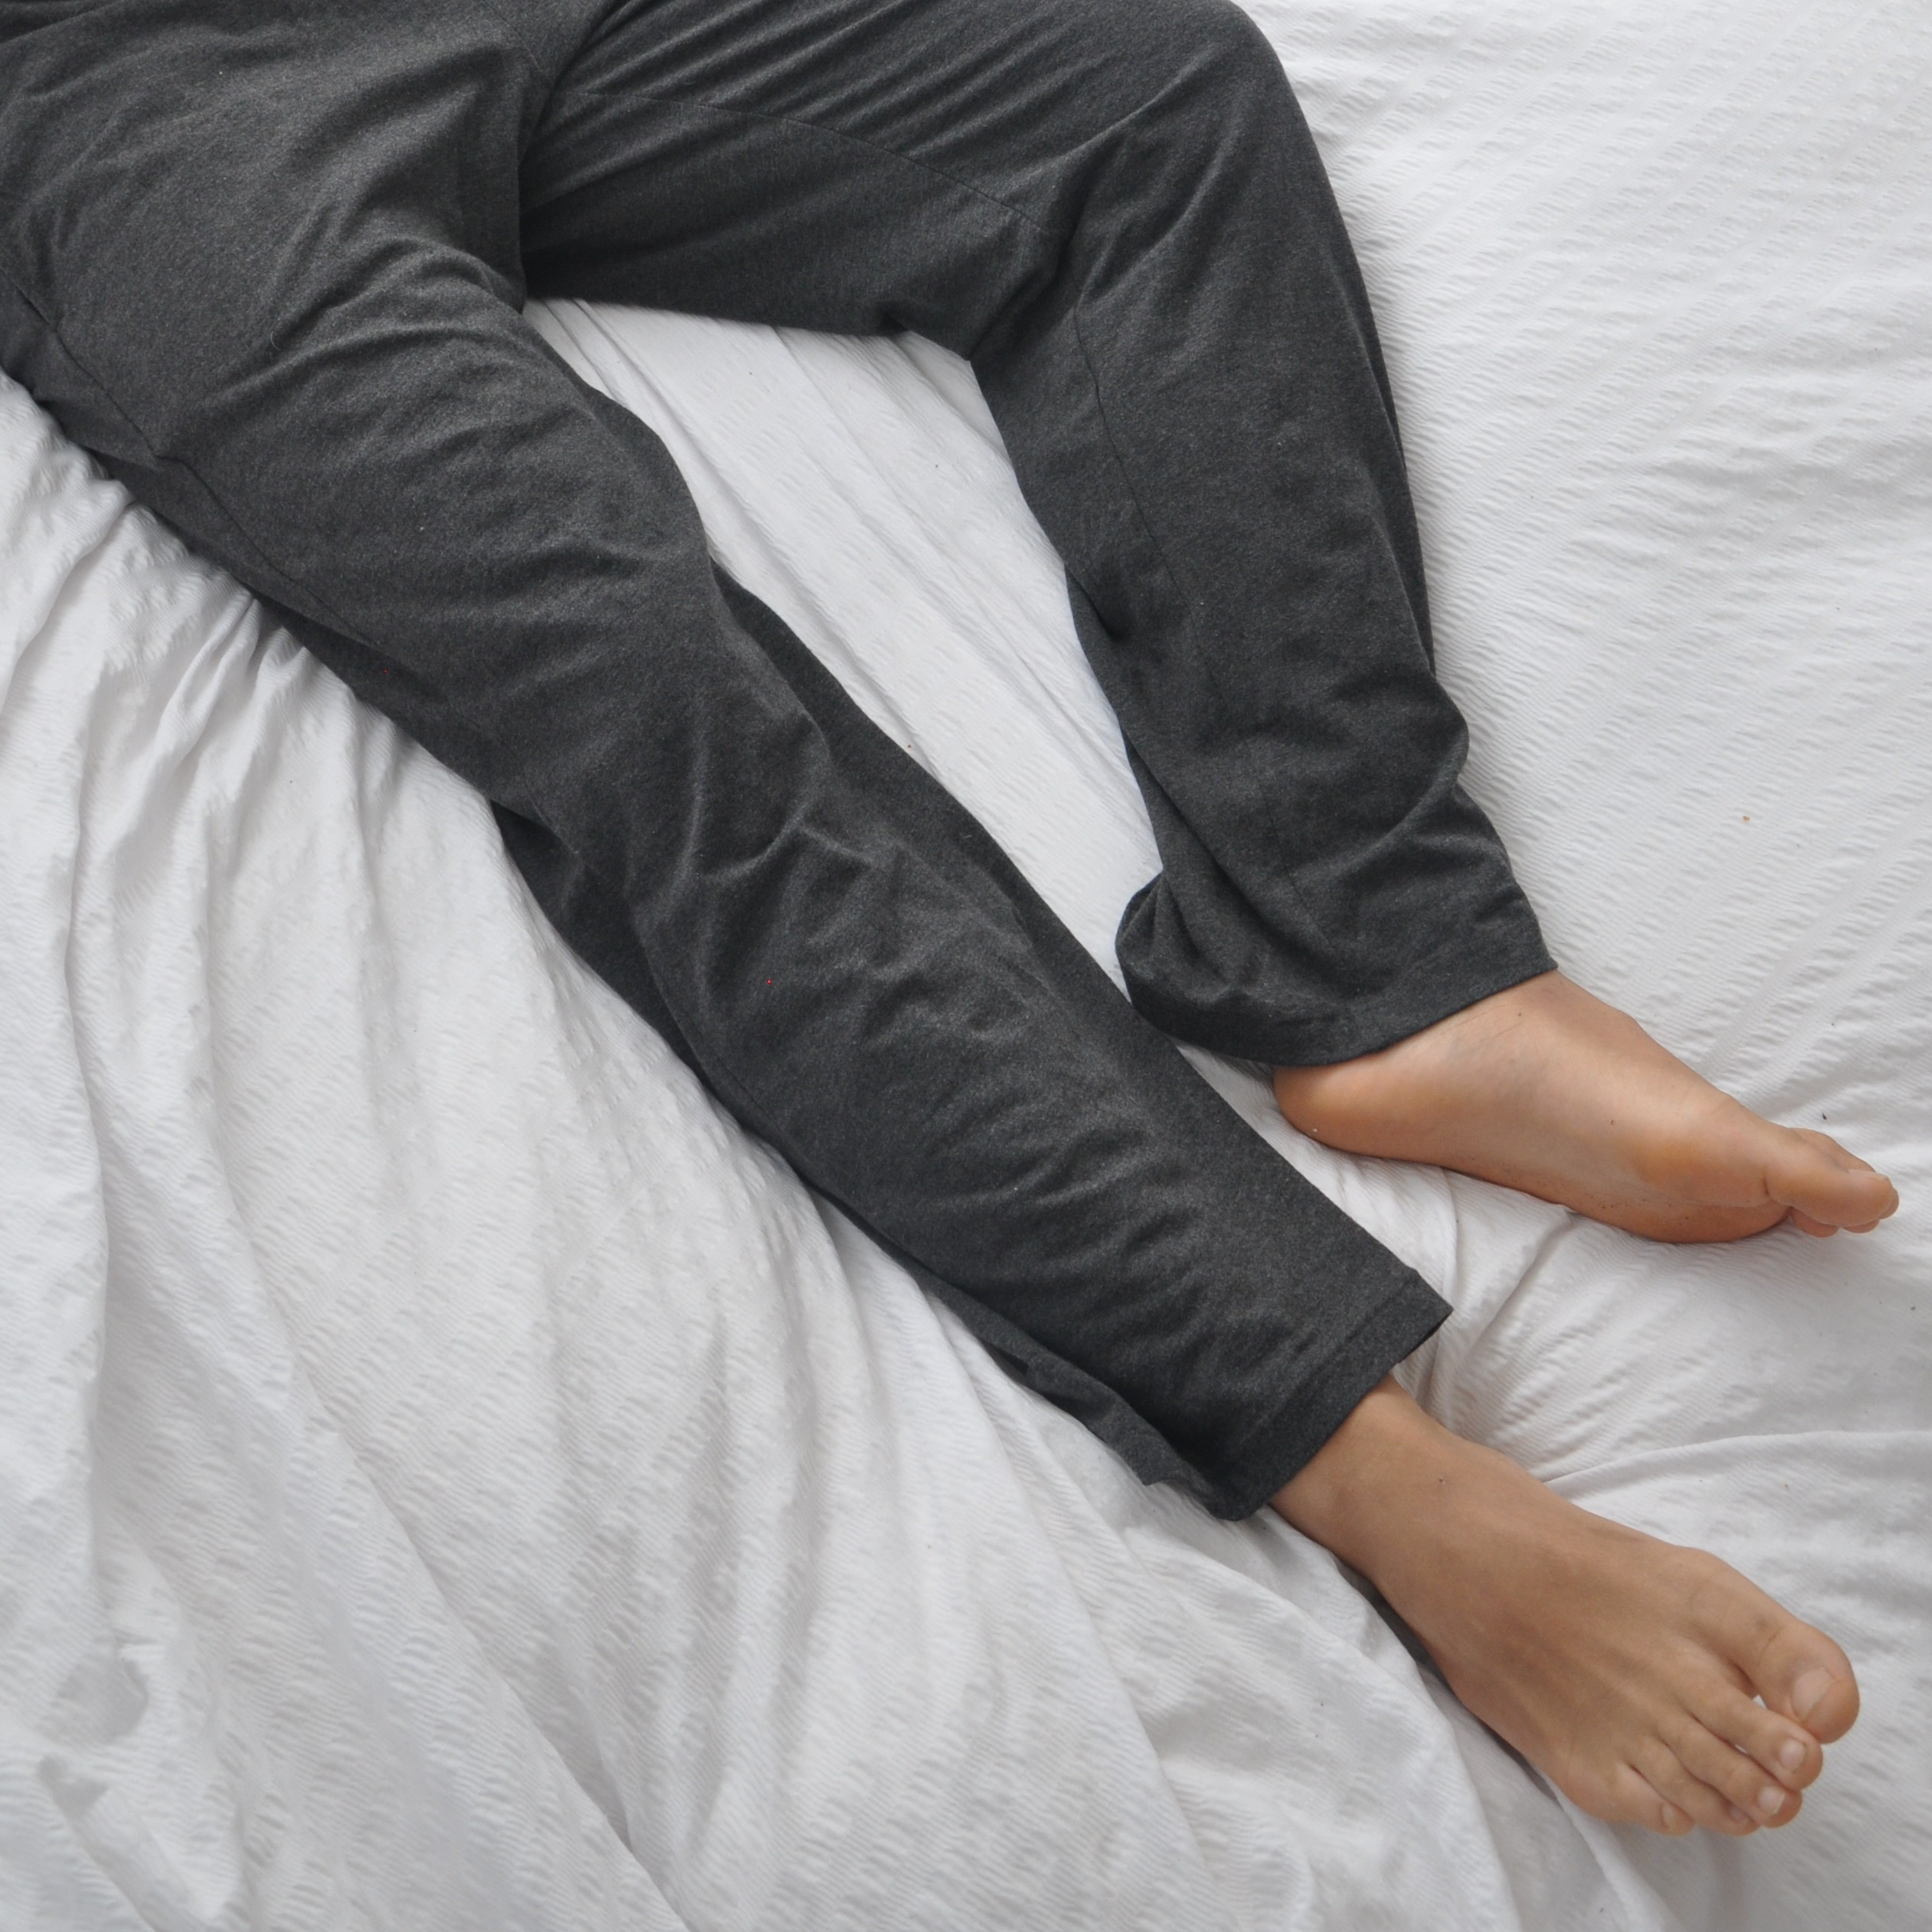 A person wearing dark grey pyjama bottoms is lying on a white bed. Their legs are stretched out, and their bare feet are visible. The bedding has a subtle textured pattern.